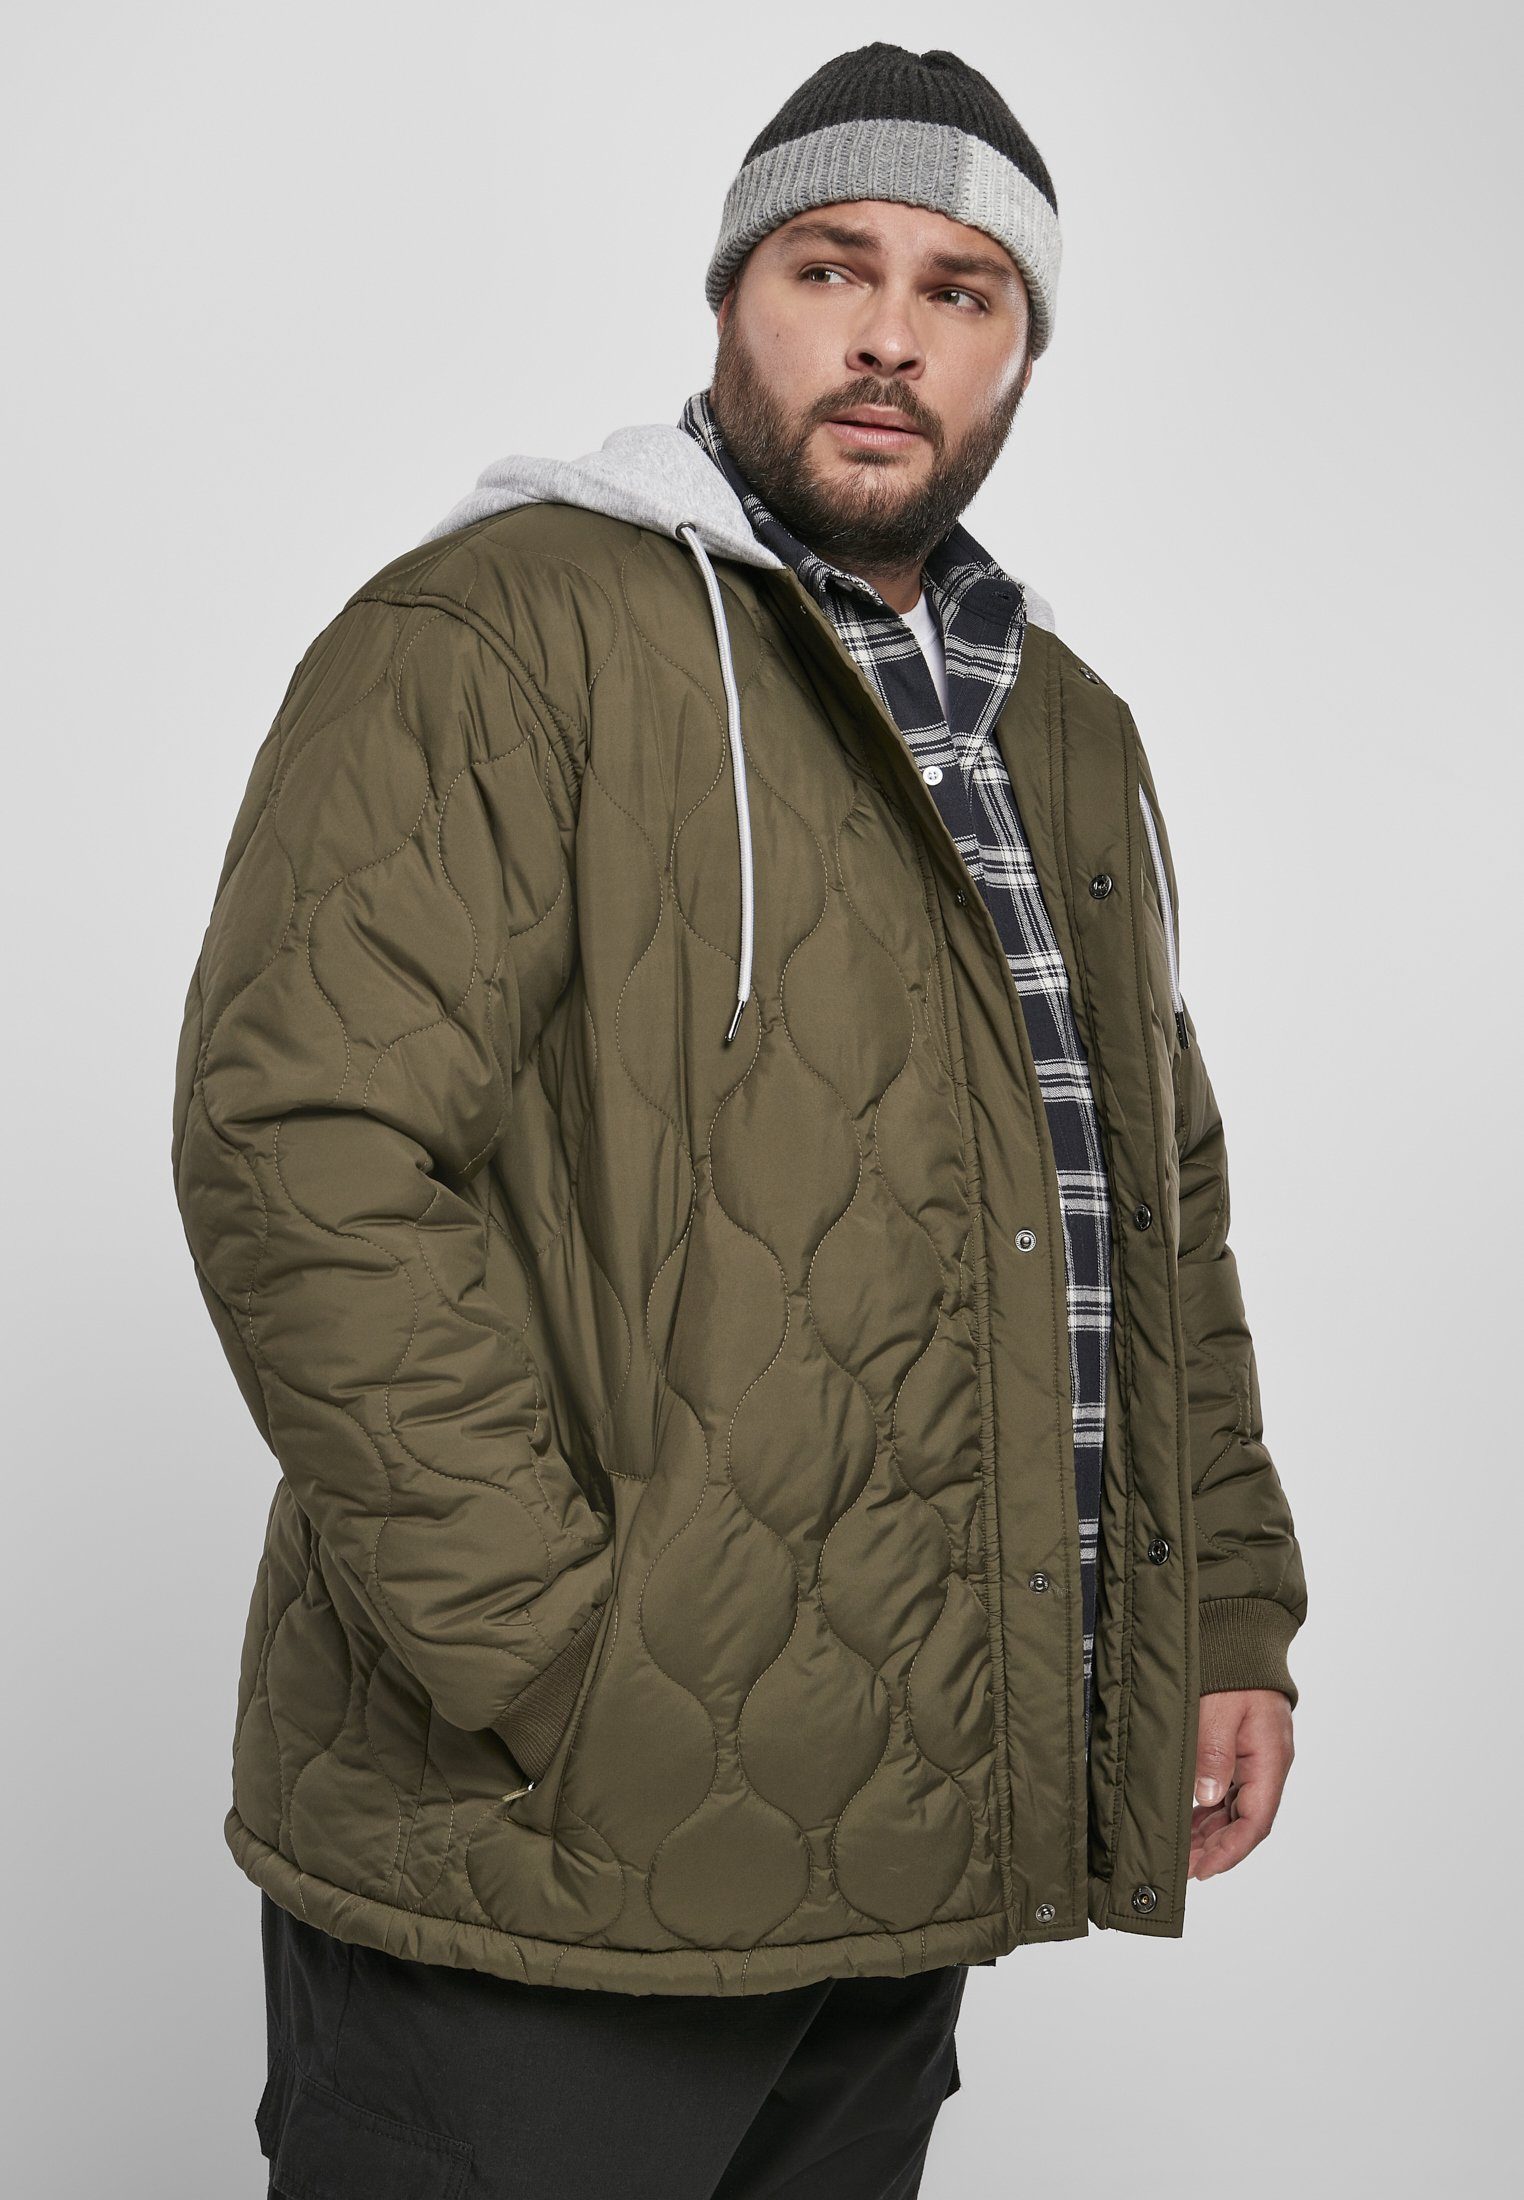 URBAN CLASSICS Outdoorjacke Männer Hooded (1-St) Jacket Quilted